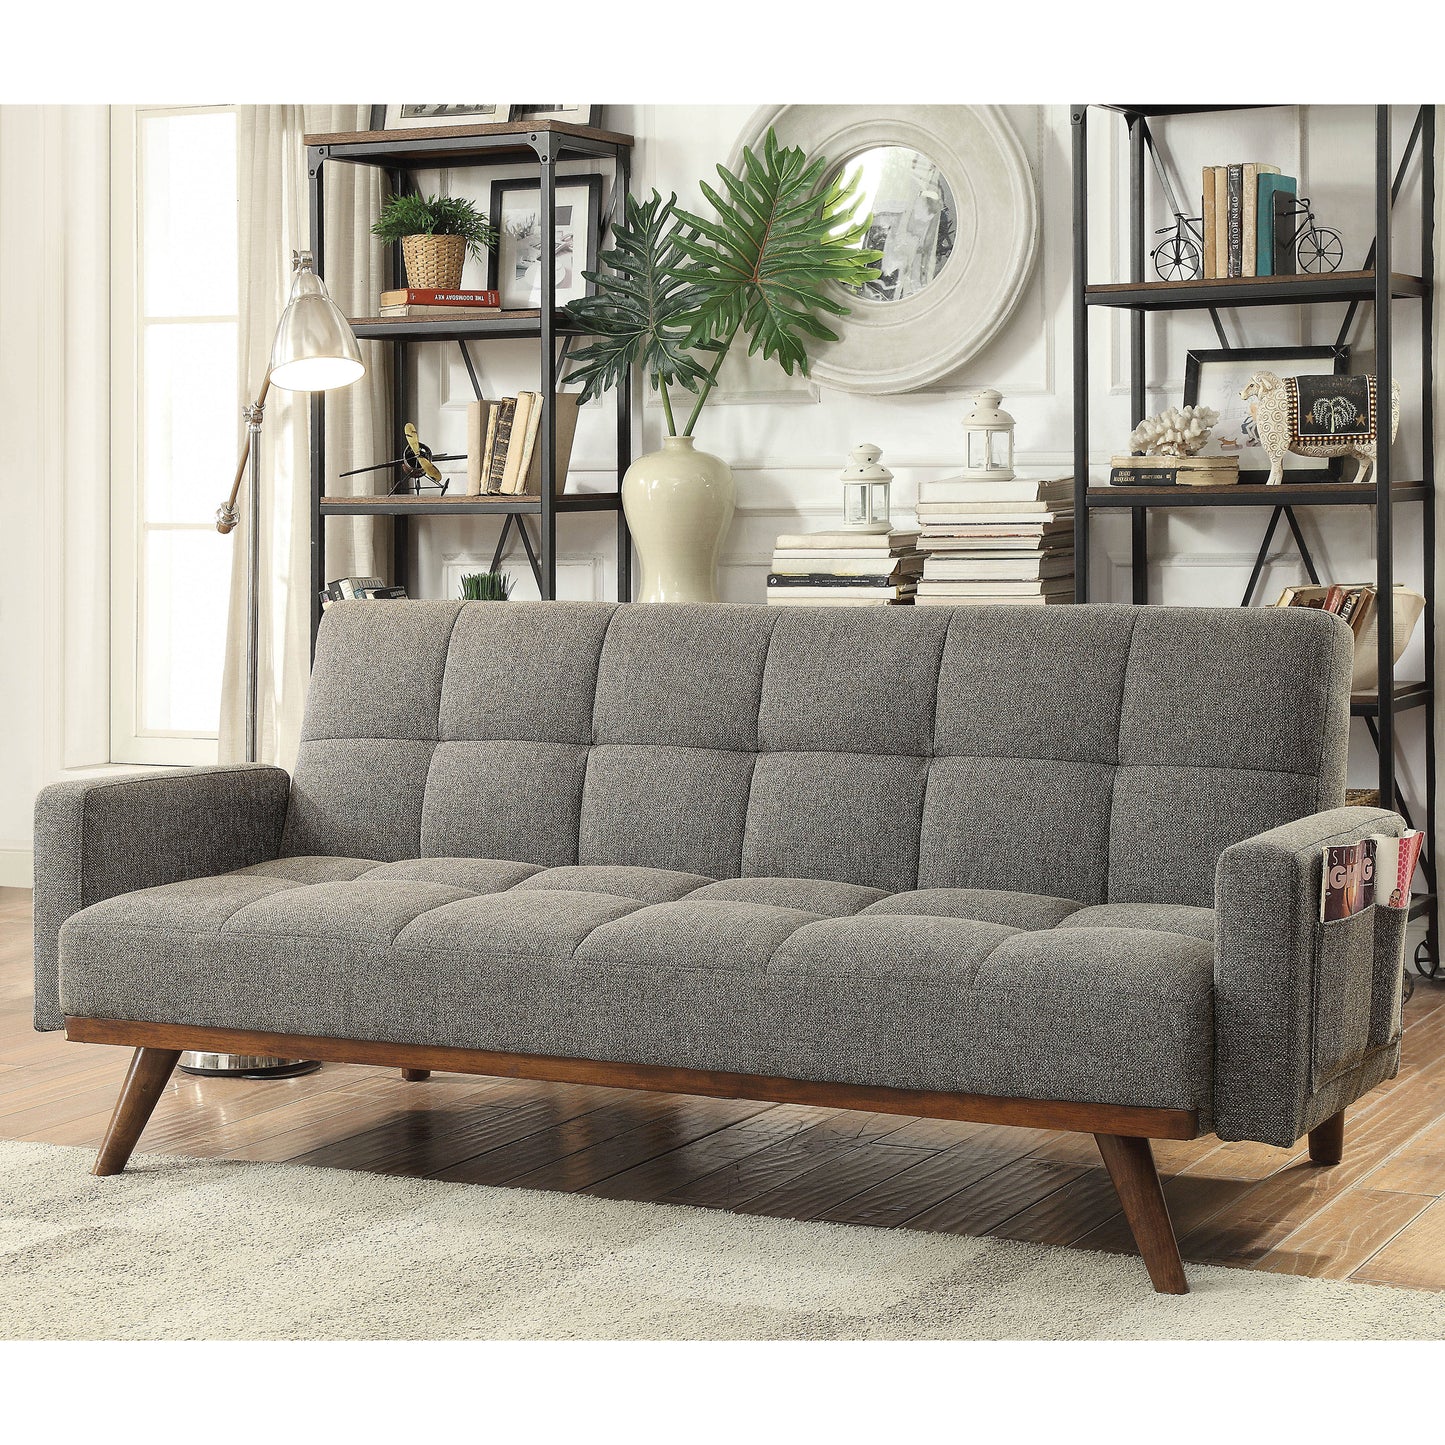 Left angled mid-century modern gray tufted futon with a wood base in a living area with accessories